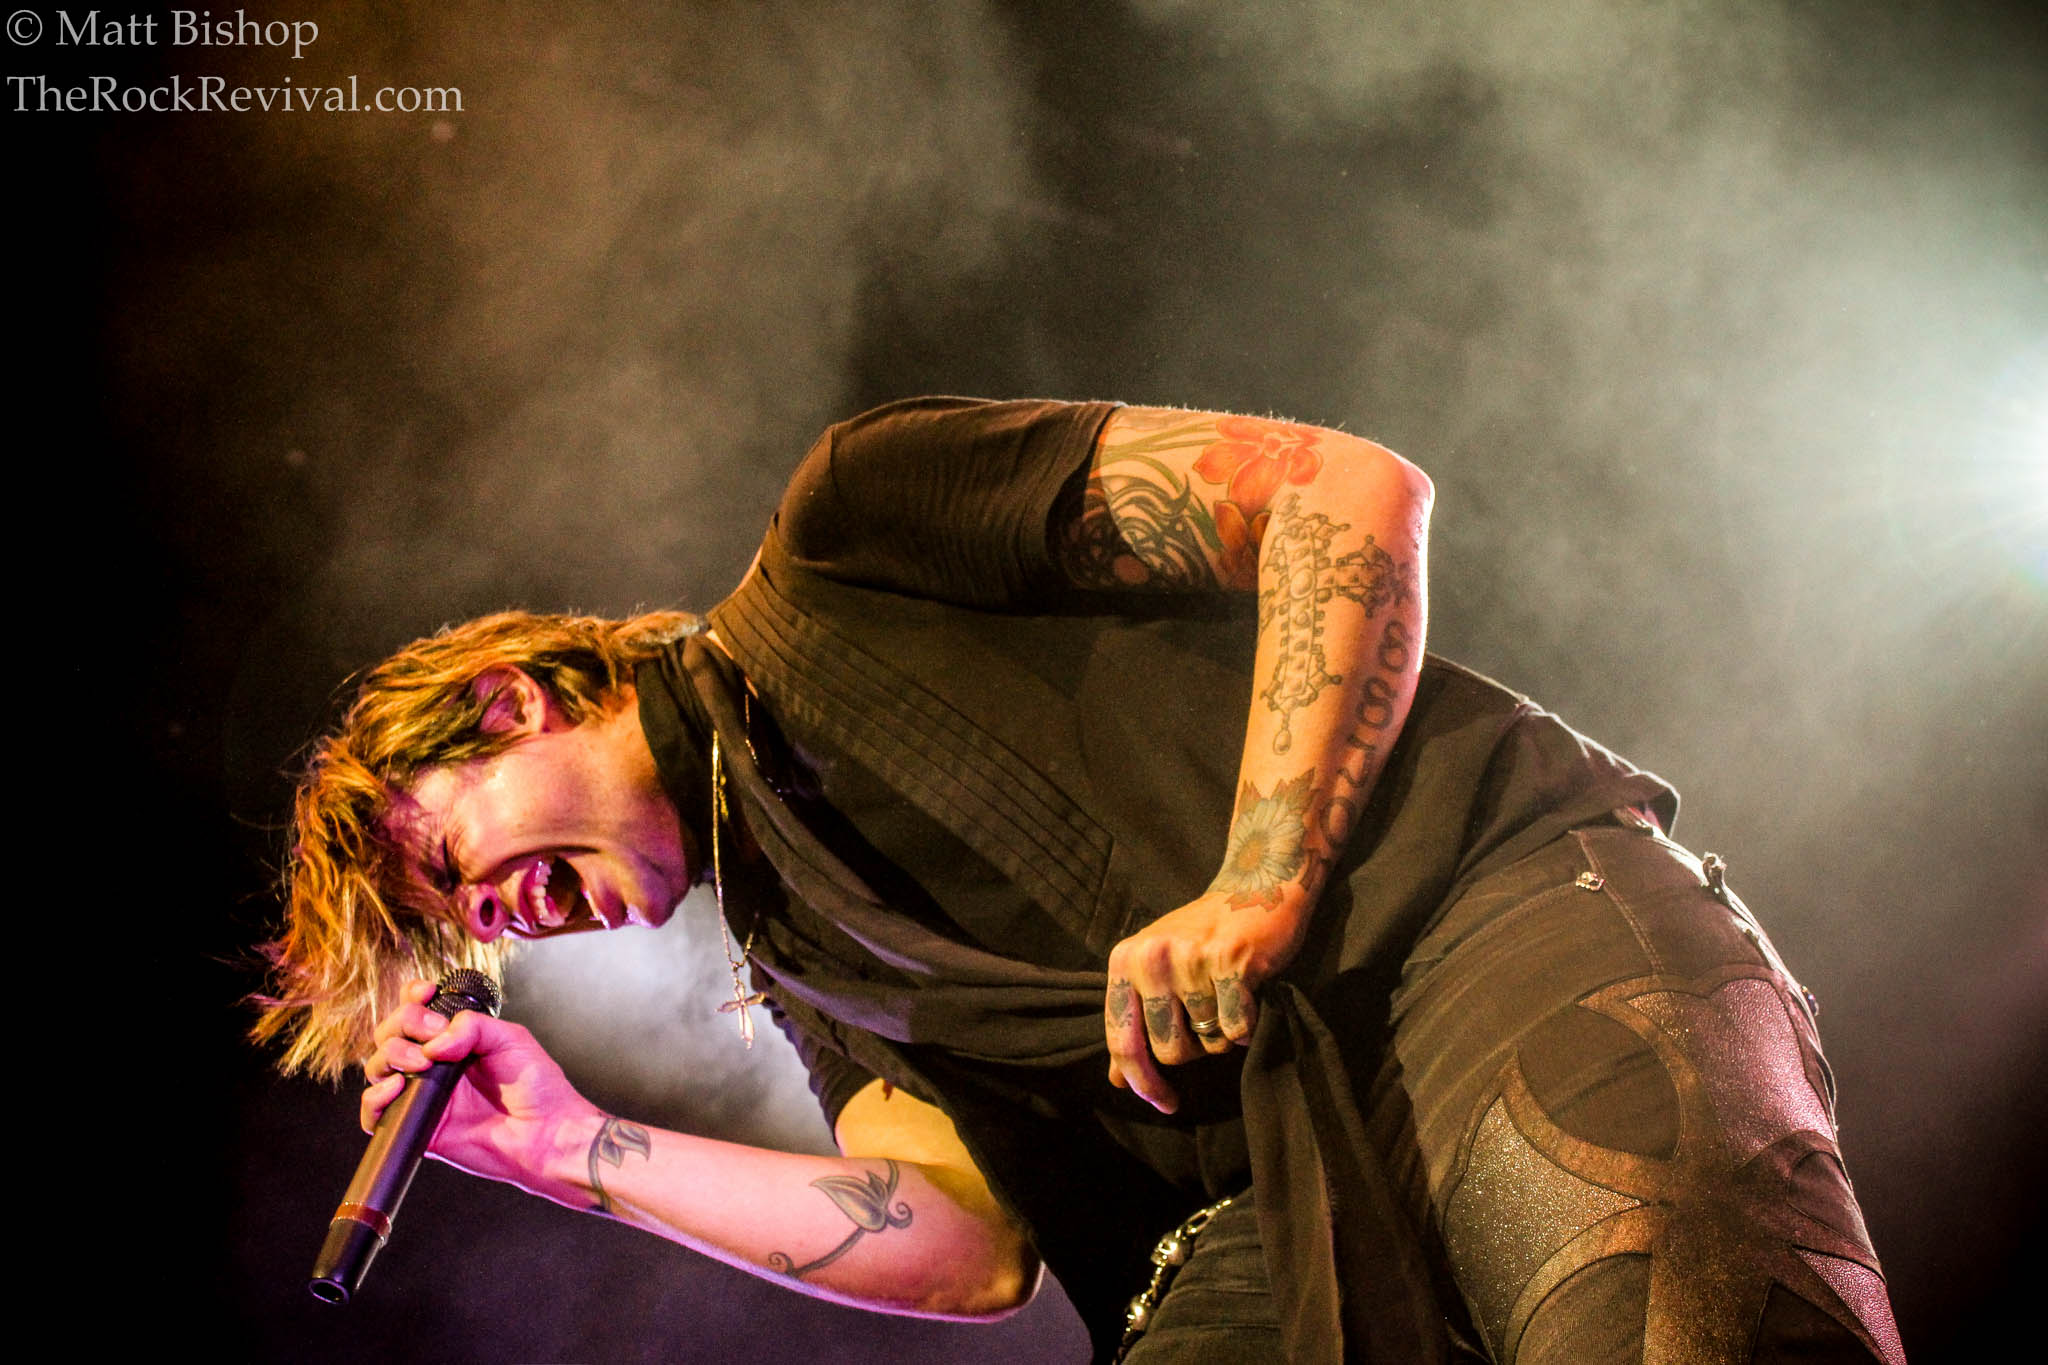 HINDER OFFICIALLY PART WAYS WITH LEAD VOCALIST AUSTIN WINKLER